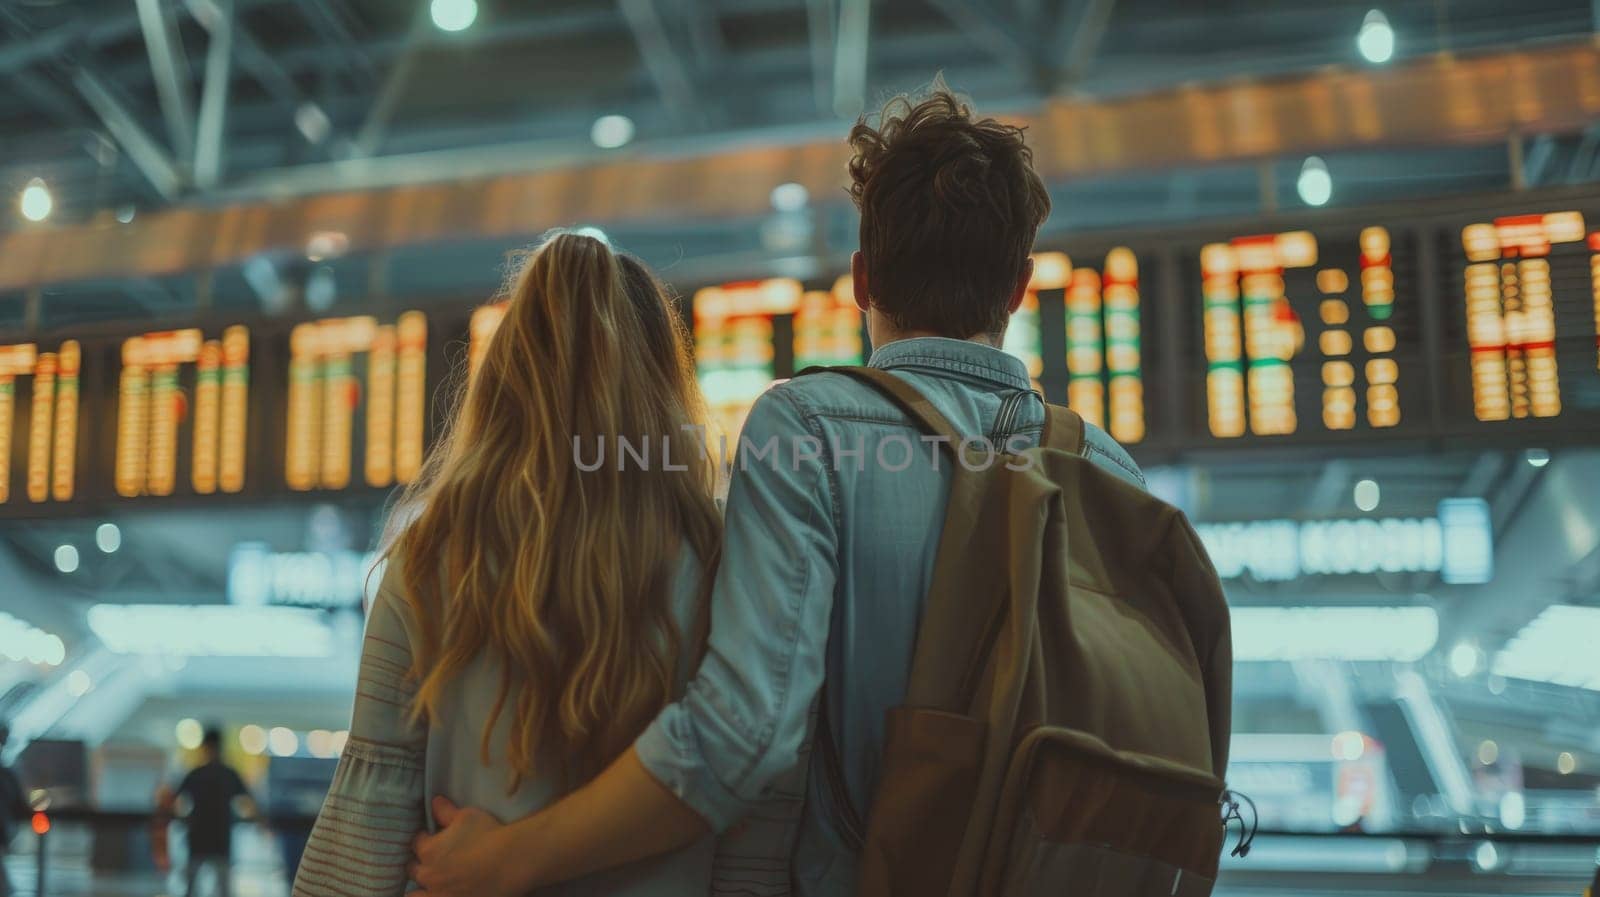 Couple traveling and looking at the flight schedule at the airport, Attractive couple in an airport.